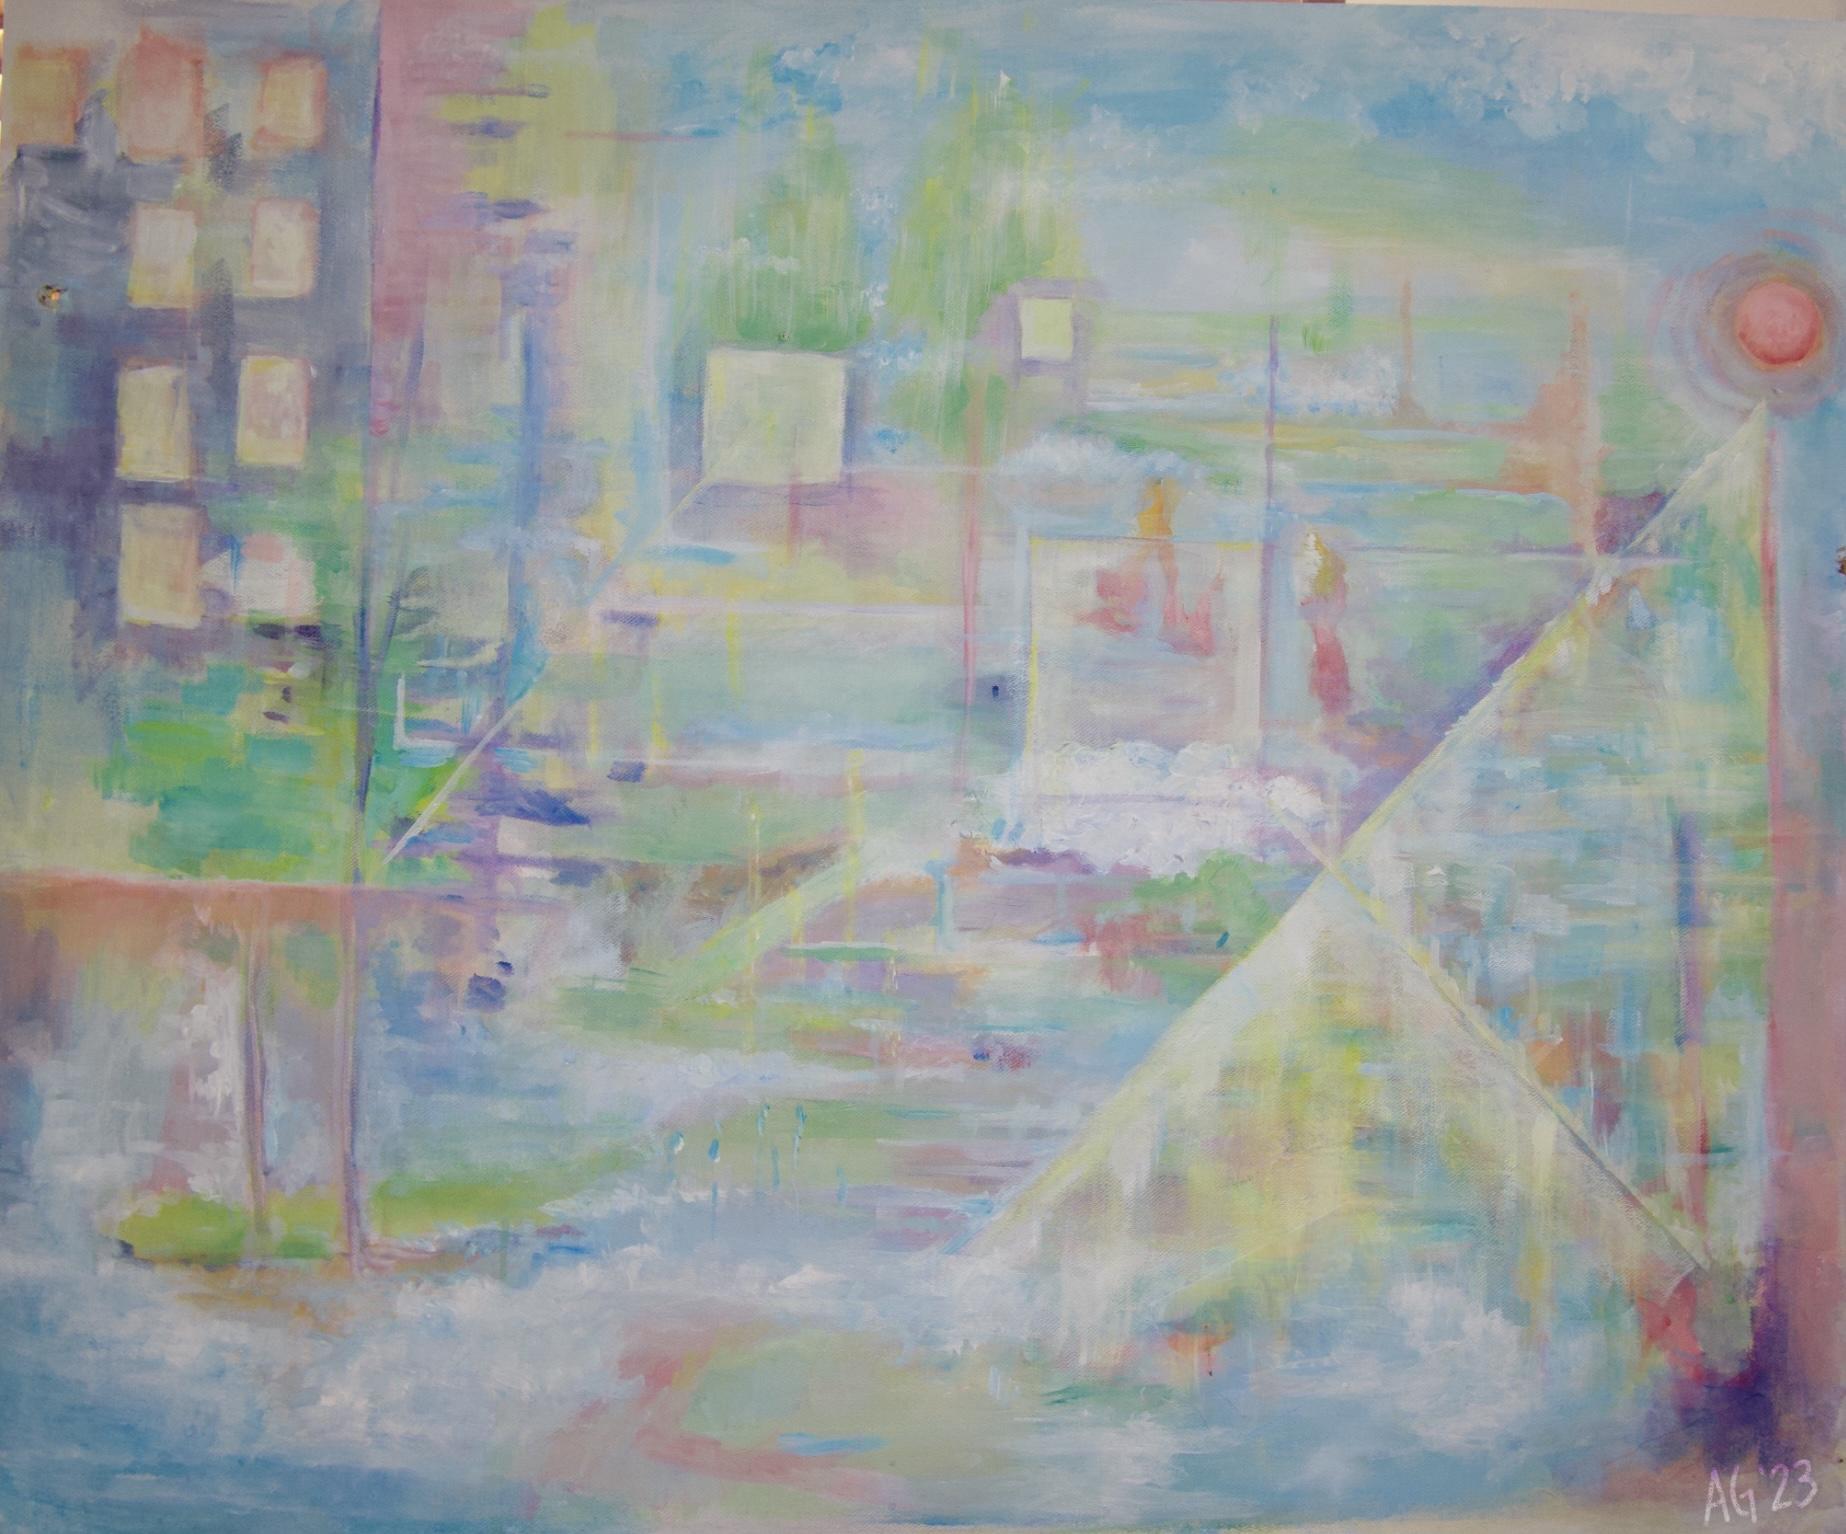 A large scale abstract landscape painting that hints at trees, water, skies, and the relationship between "nature" and the built environment.